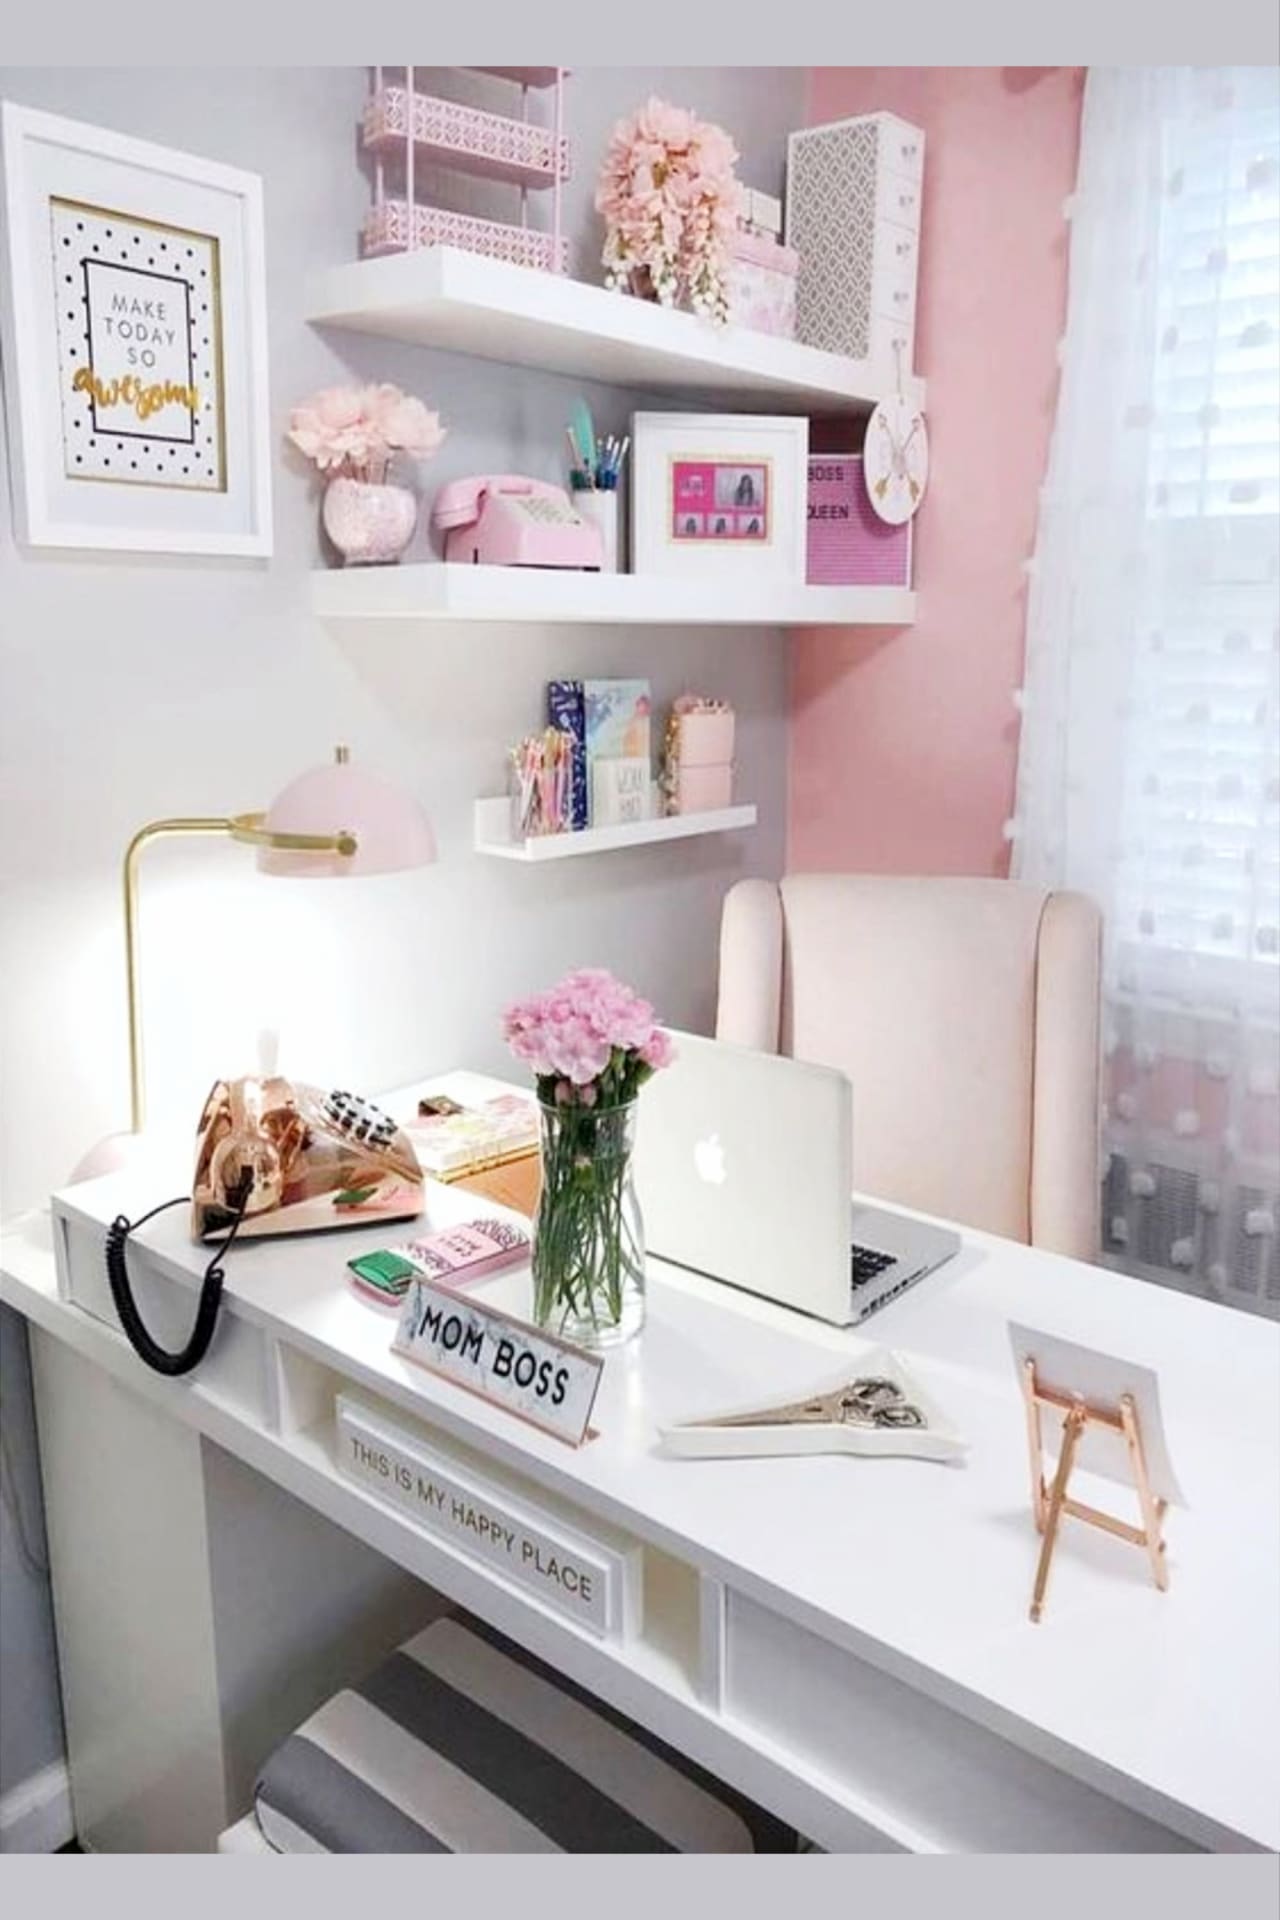 Home Office Ideas for Women (even if you're on a budget) Pretty small spaces and glam and elegant home office inspiration for work at home moms